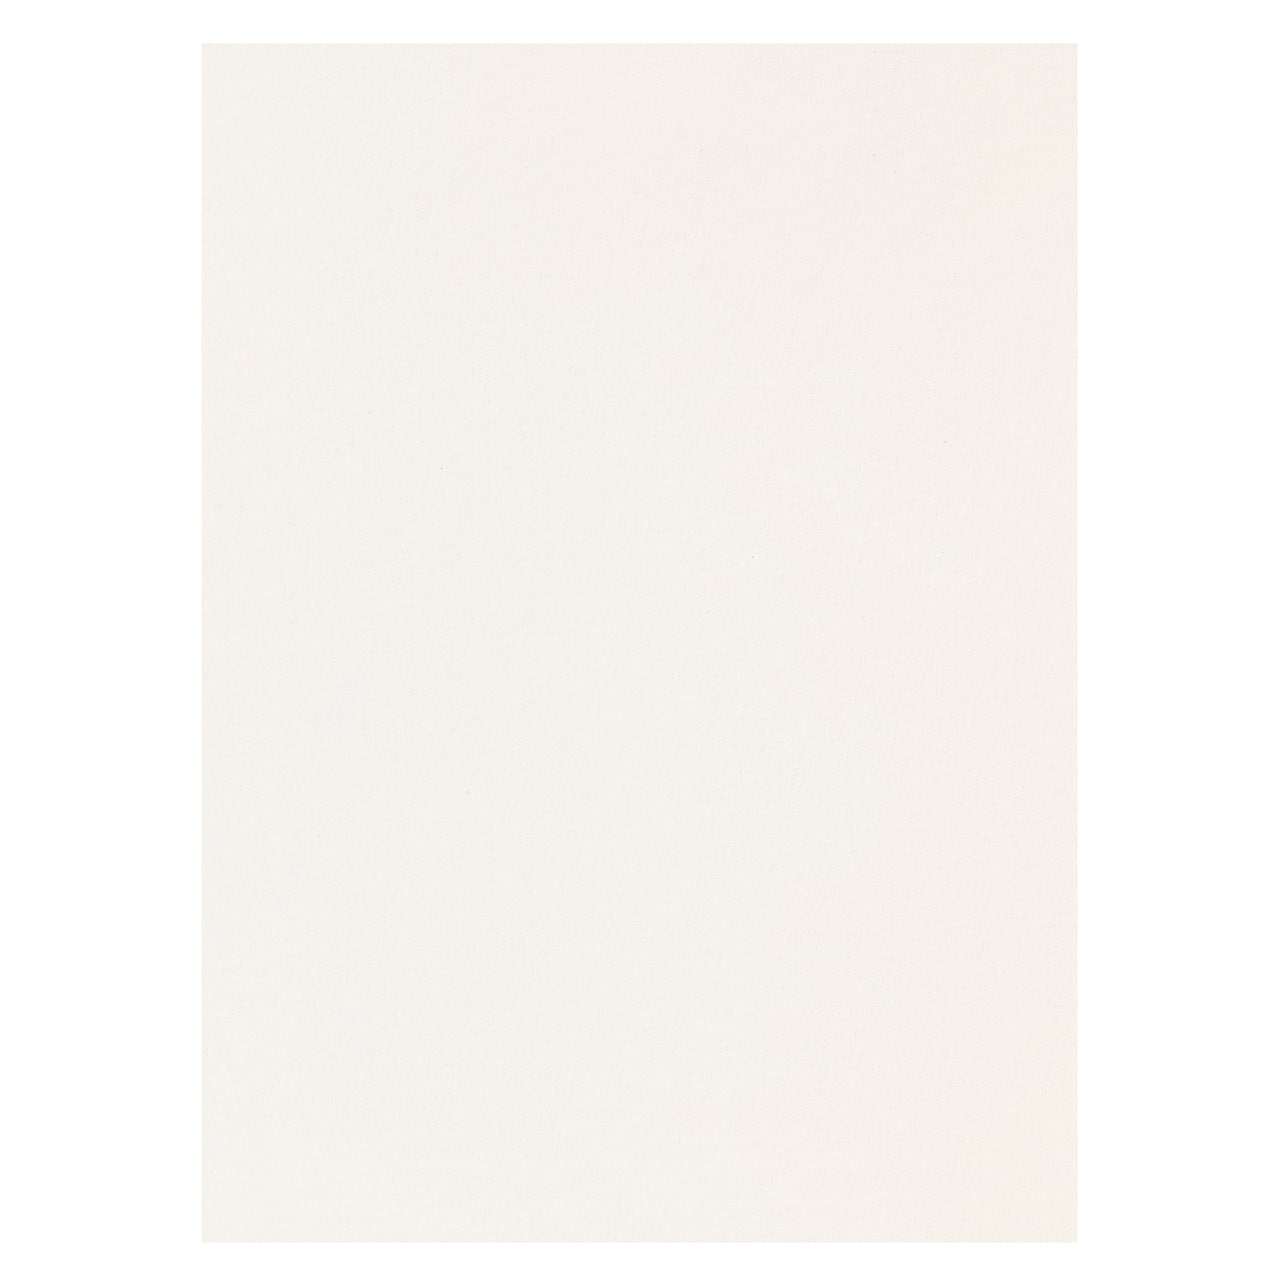 White Dove 5.5 x 7.5 Cardstock Paper by Recollections™, 100